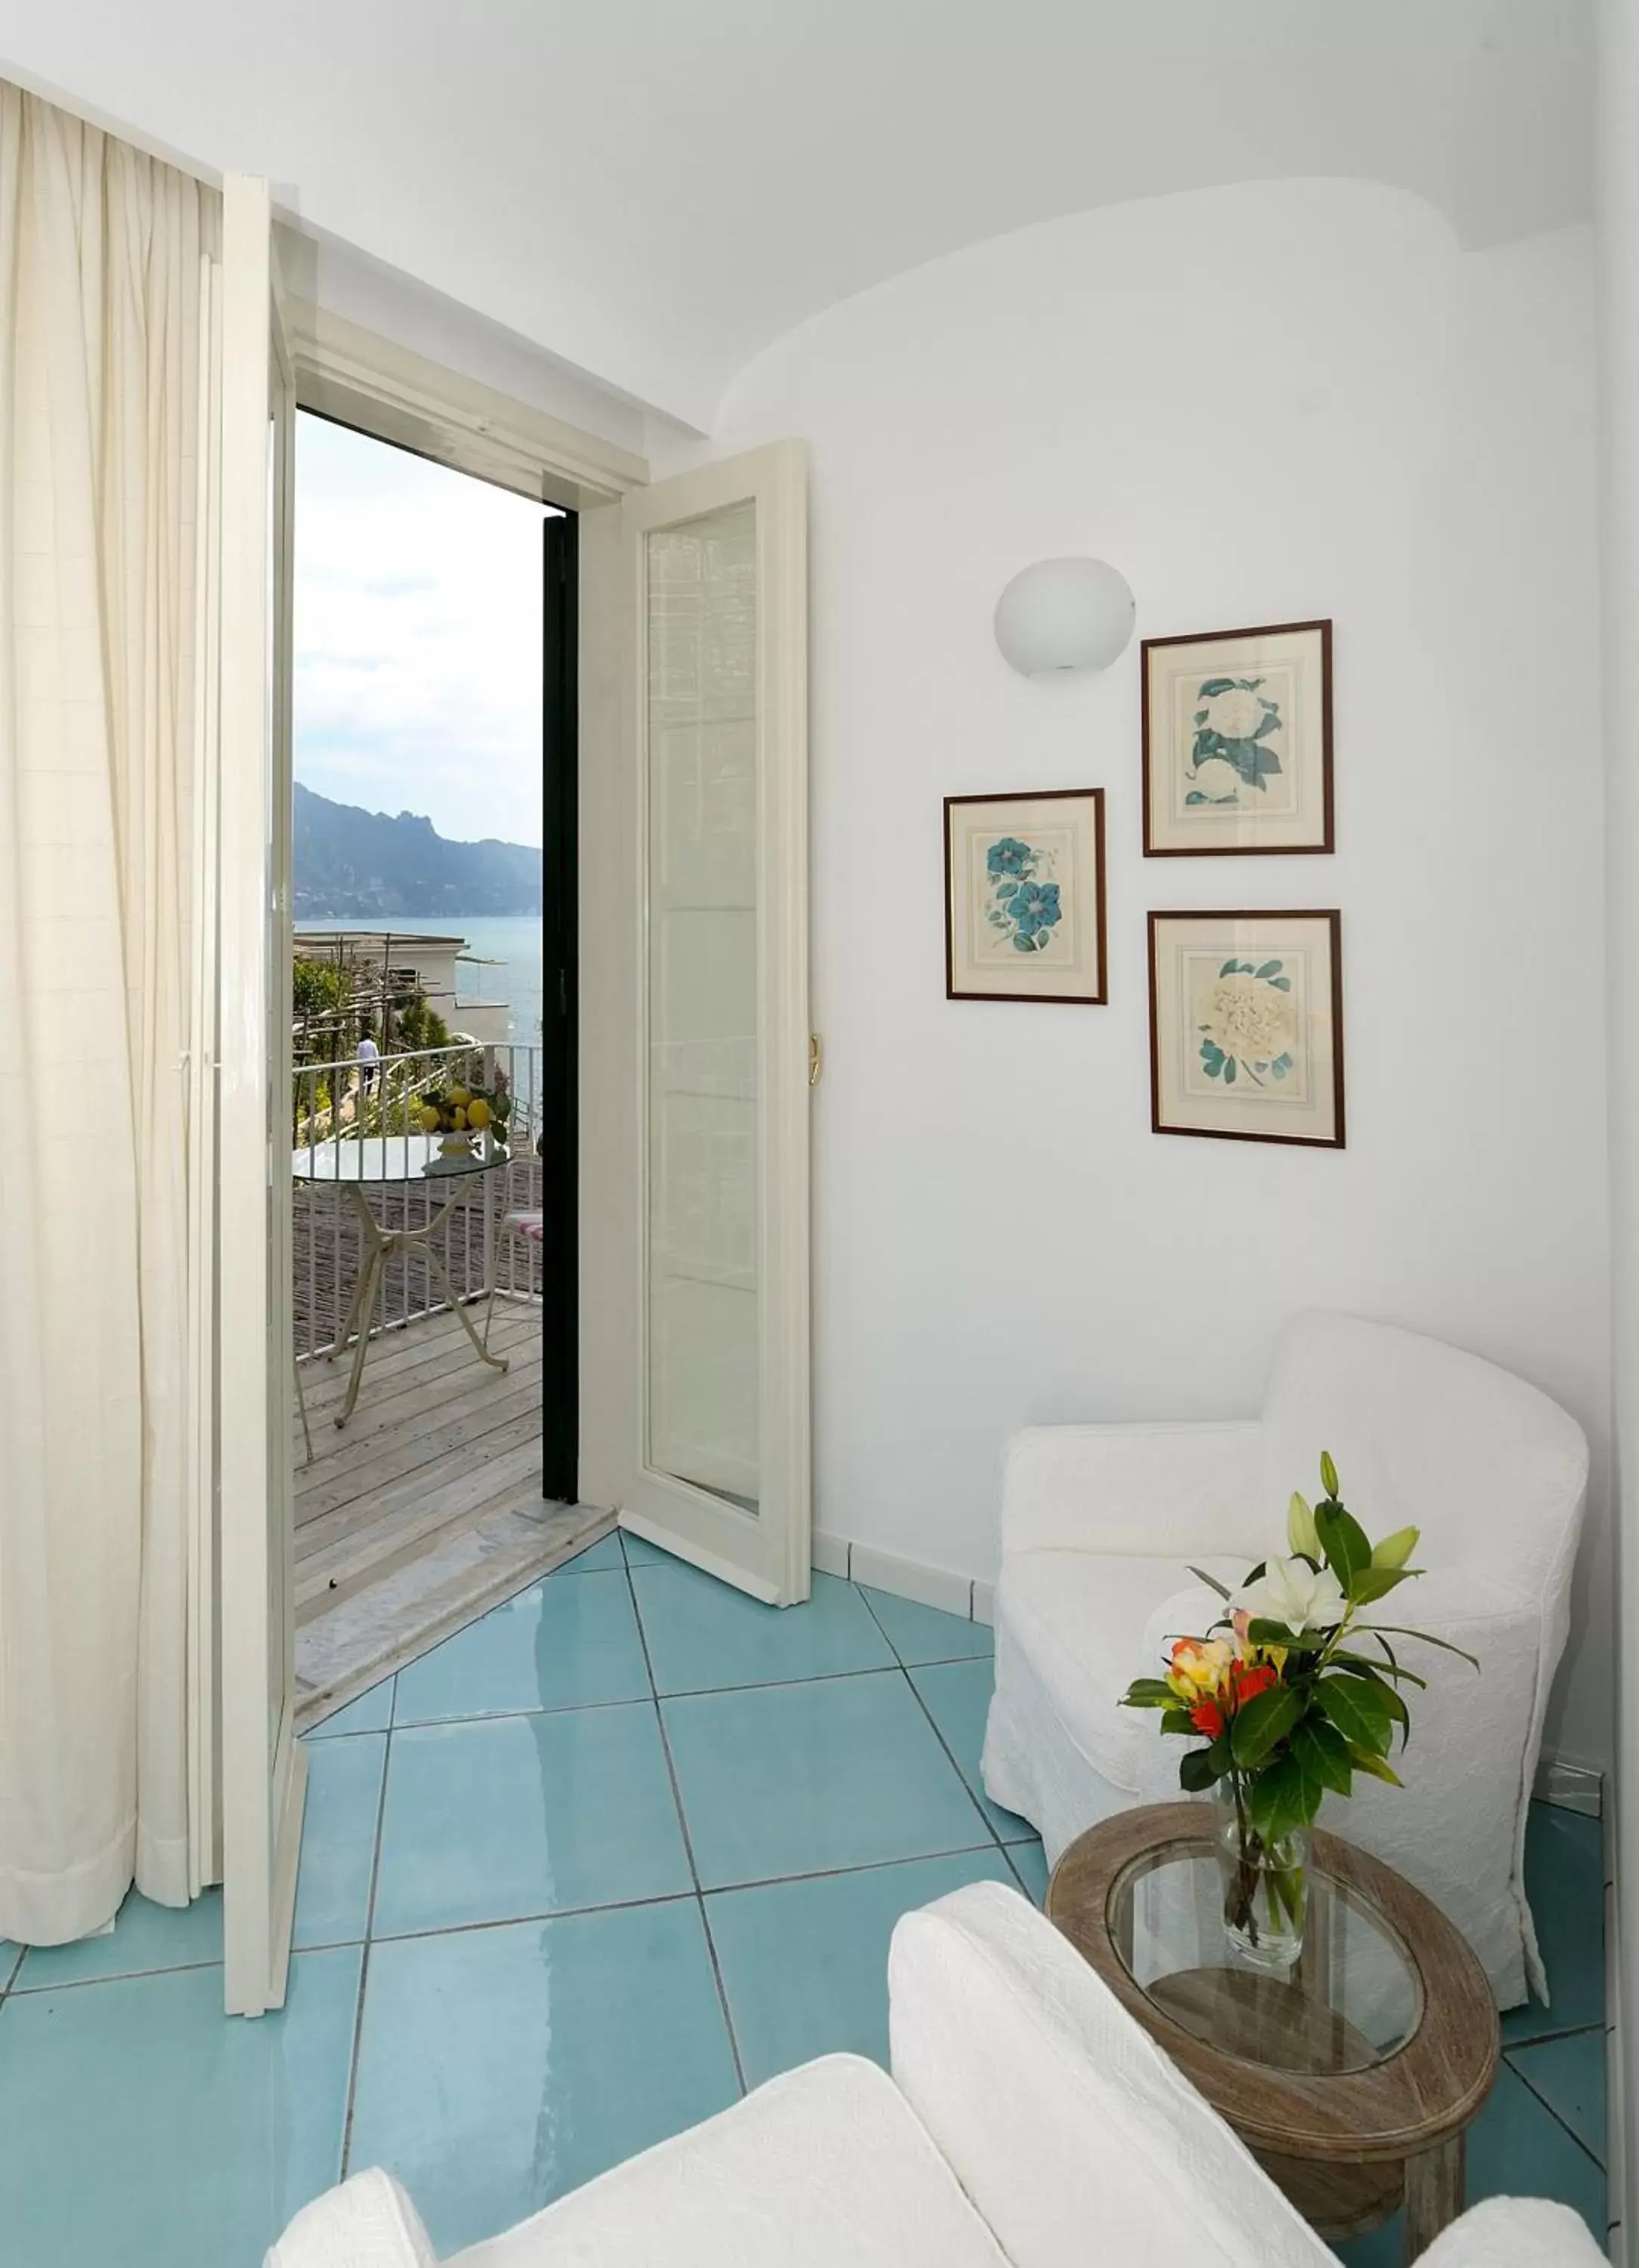 View (from property/room) in Hotel Santa Caterina